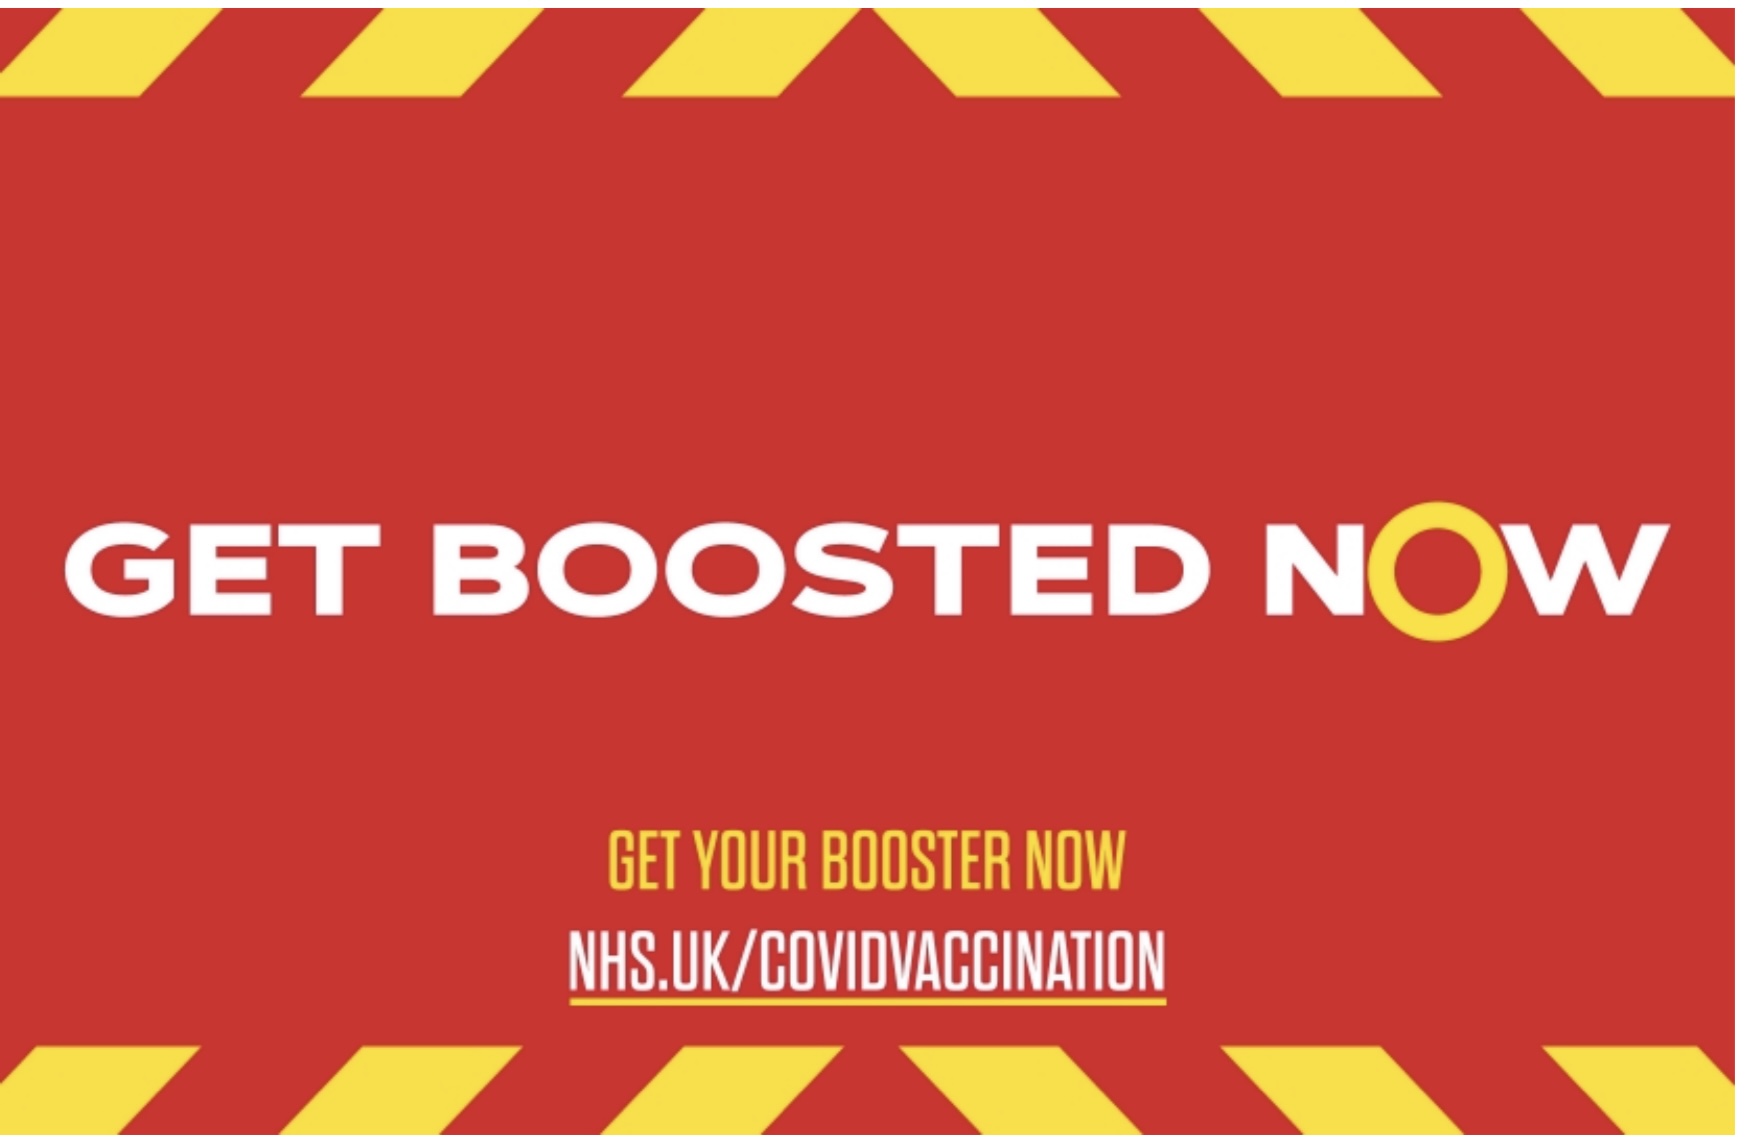 Get Boosted Now